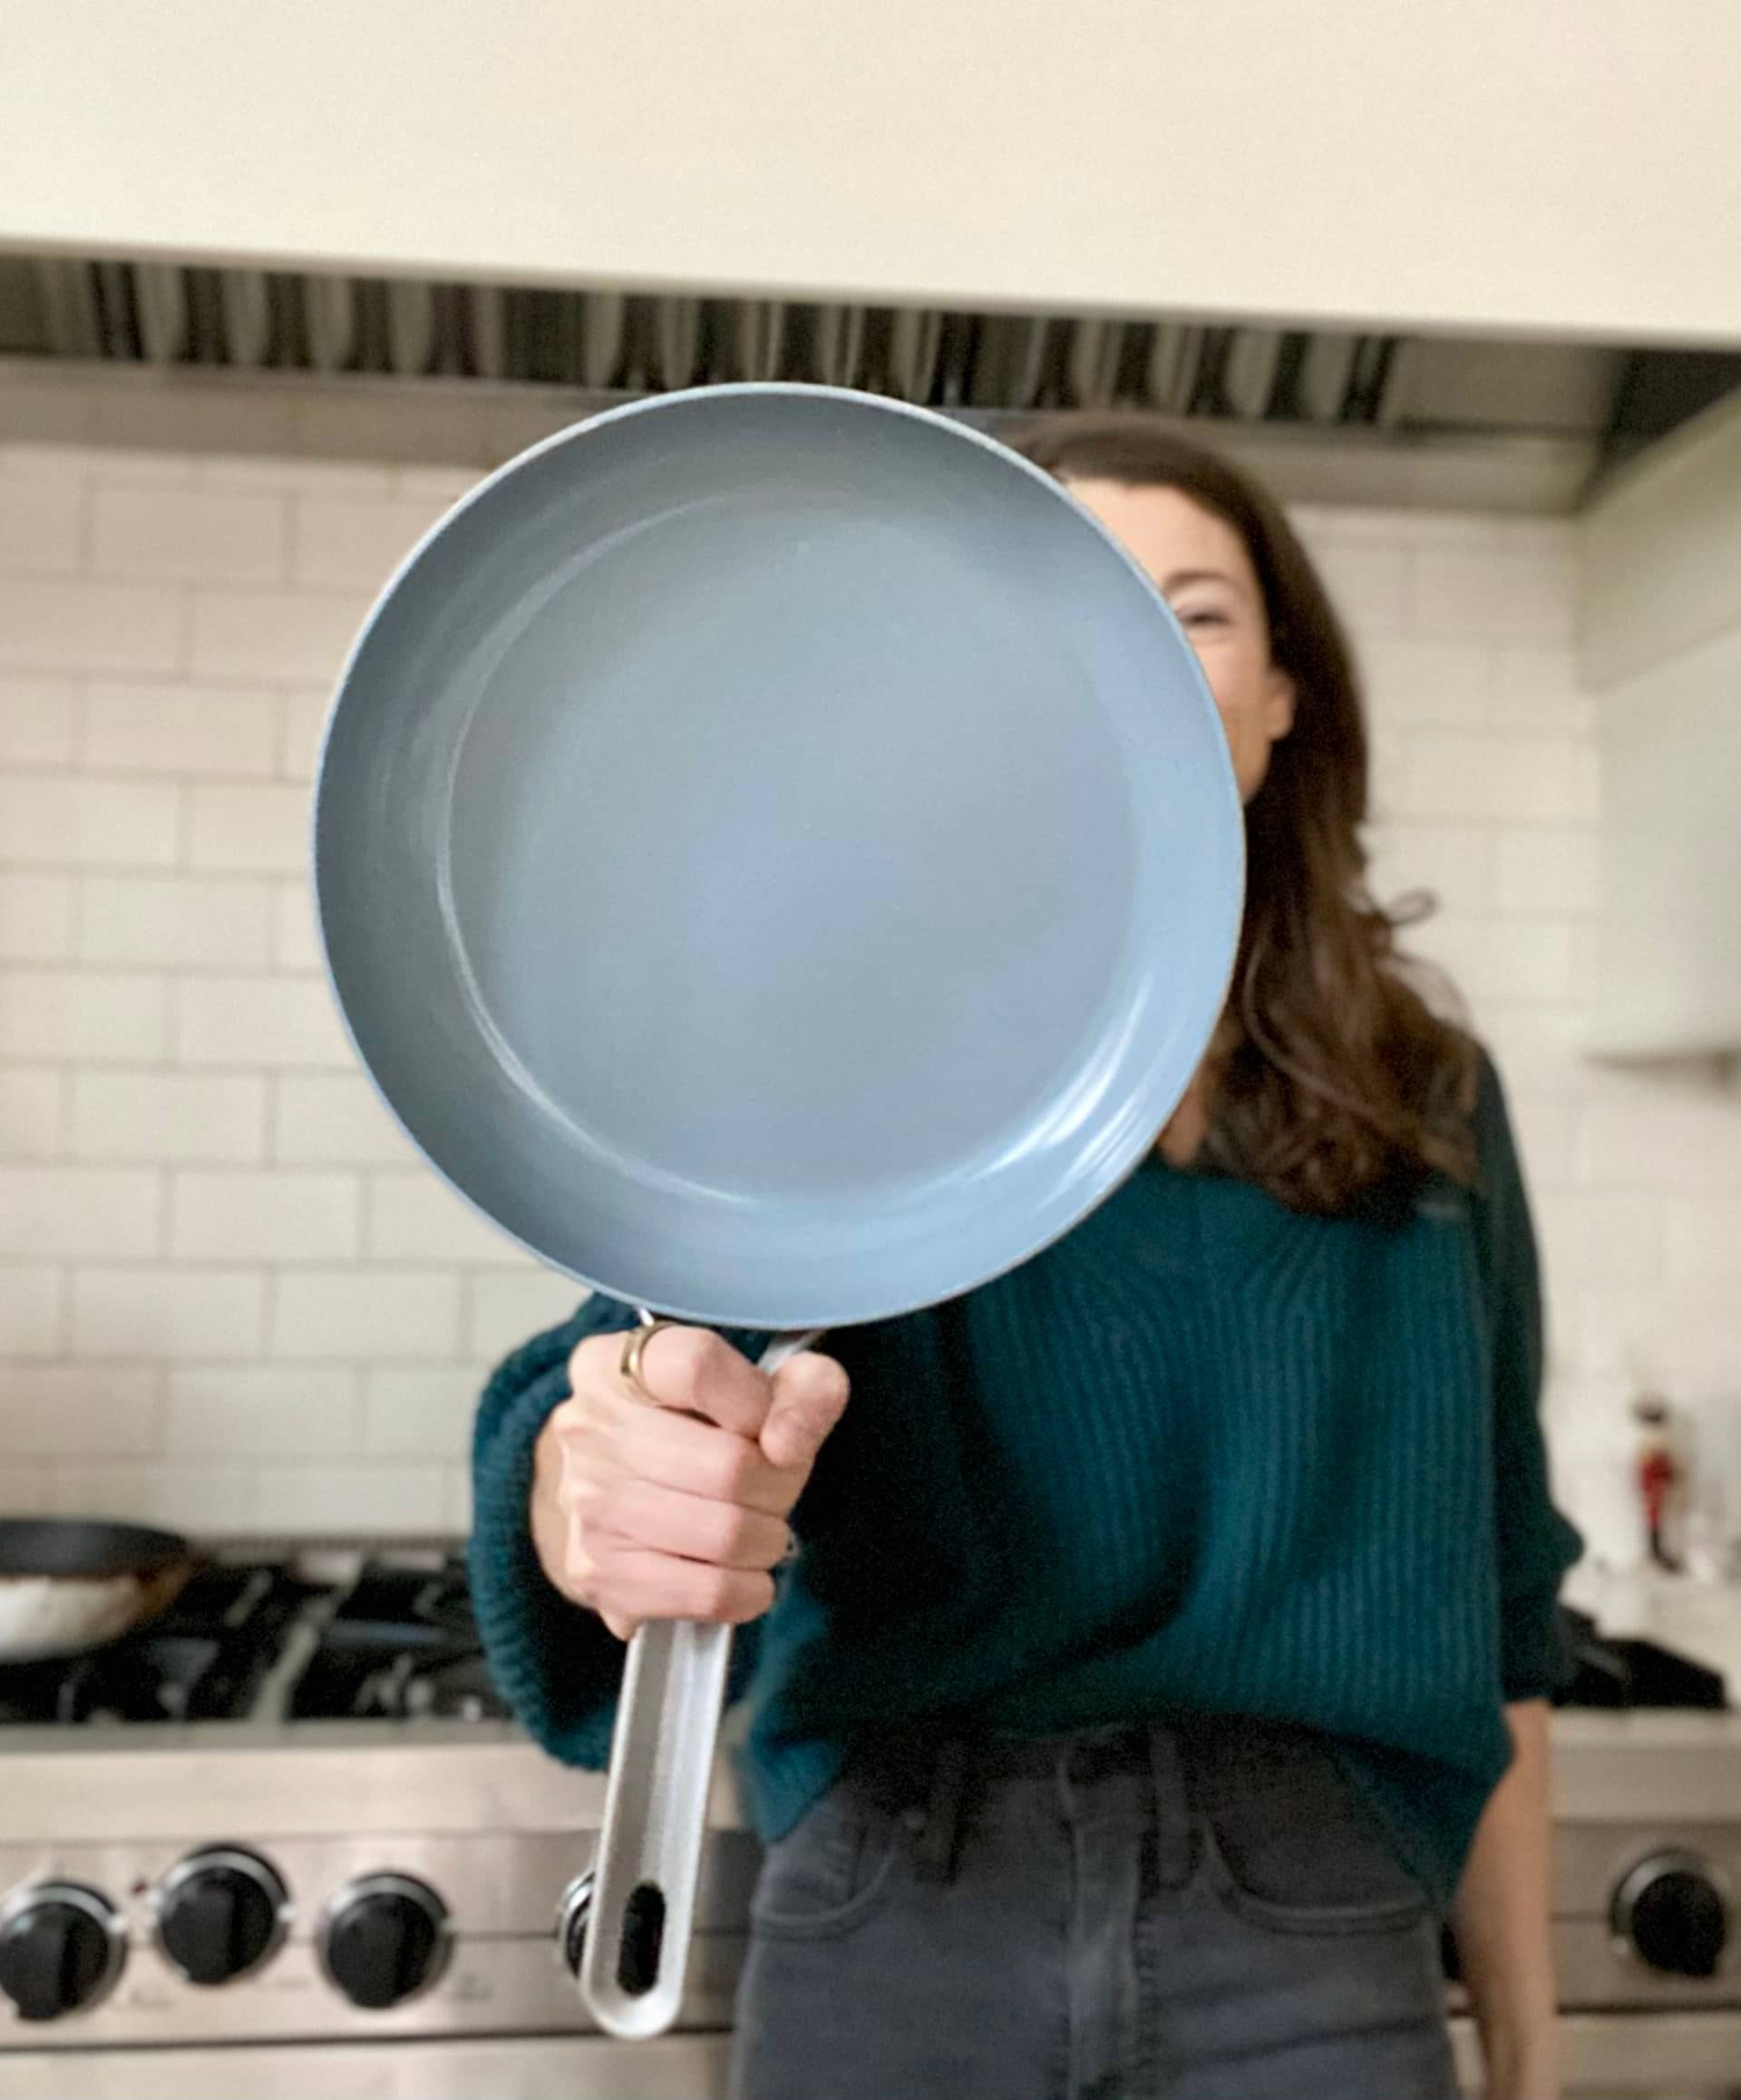 Jessica holding nonstick five two pan